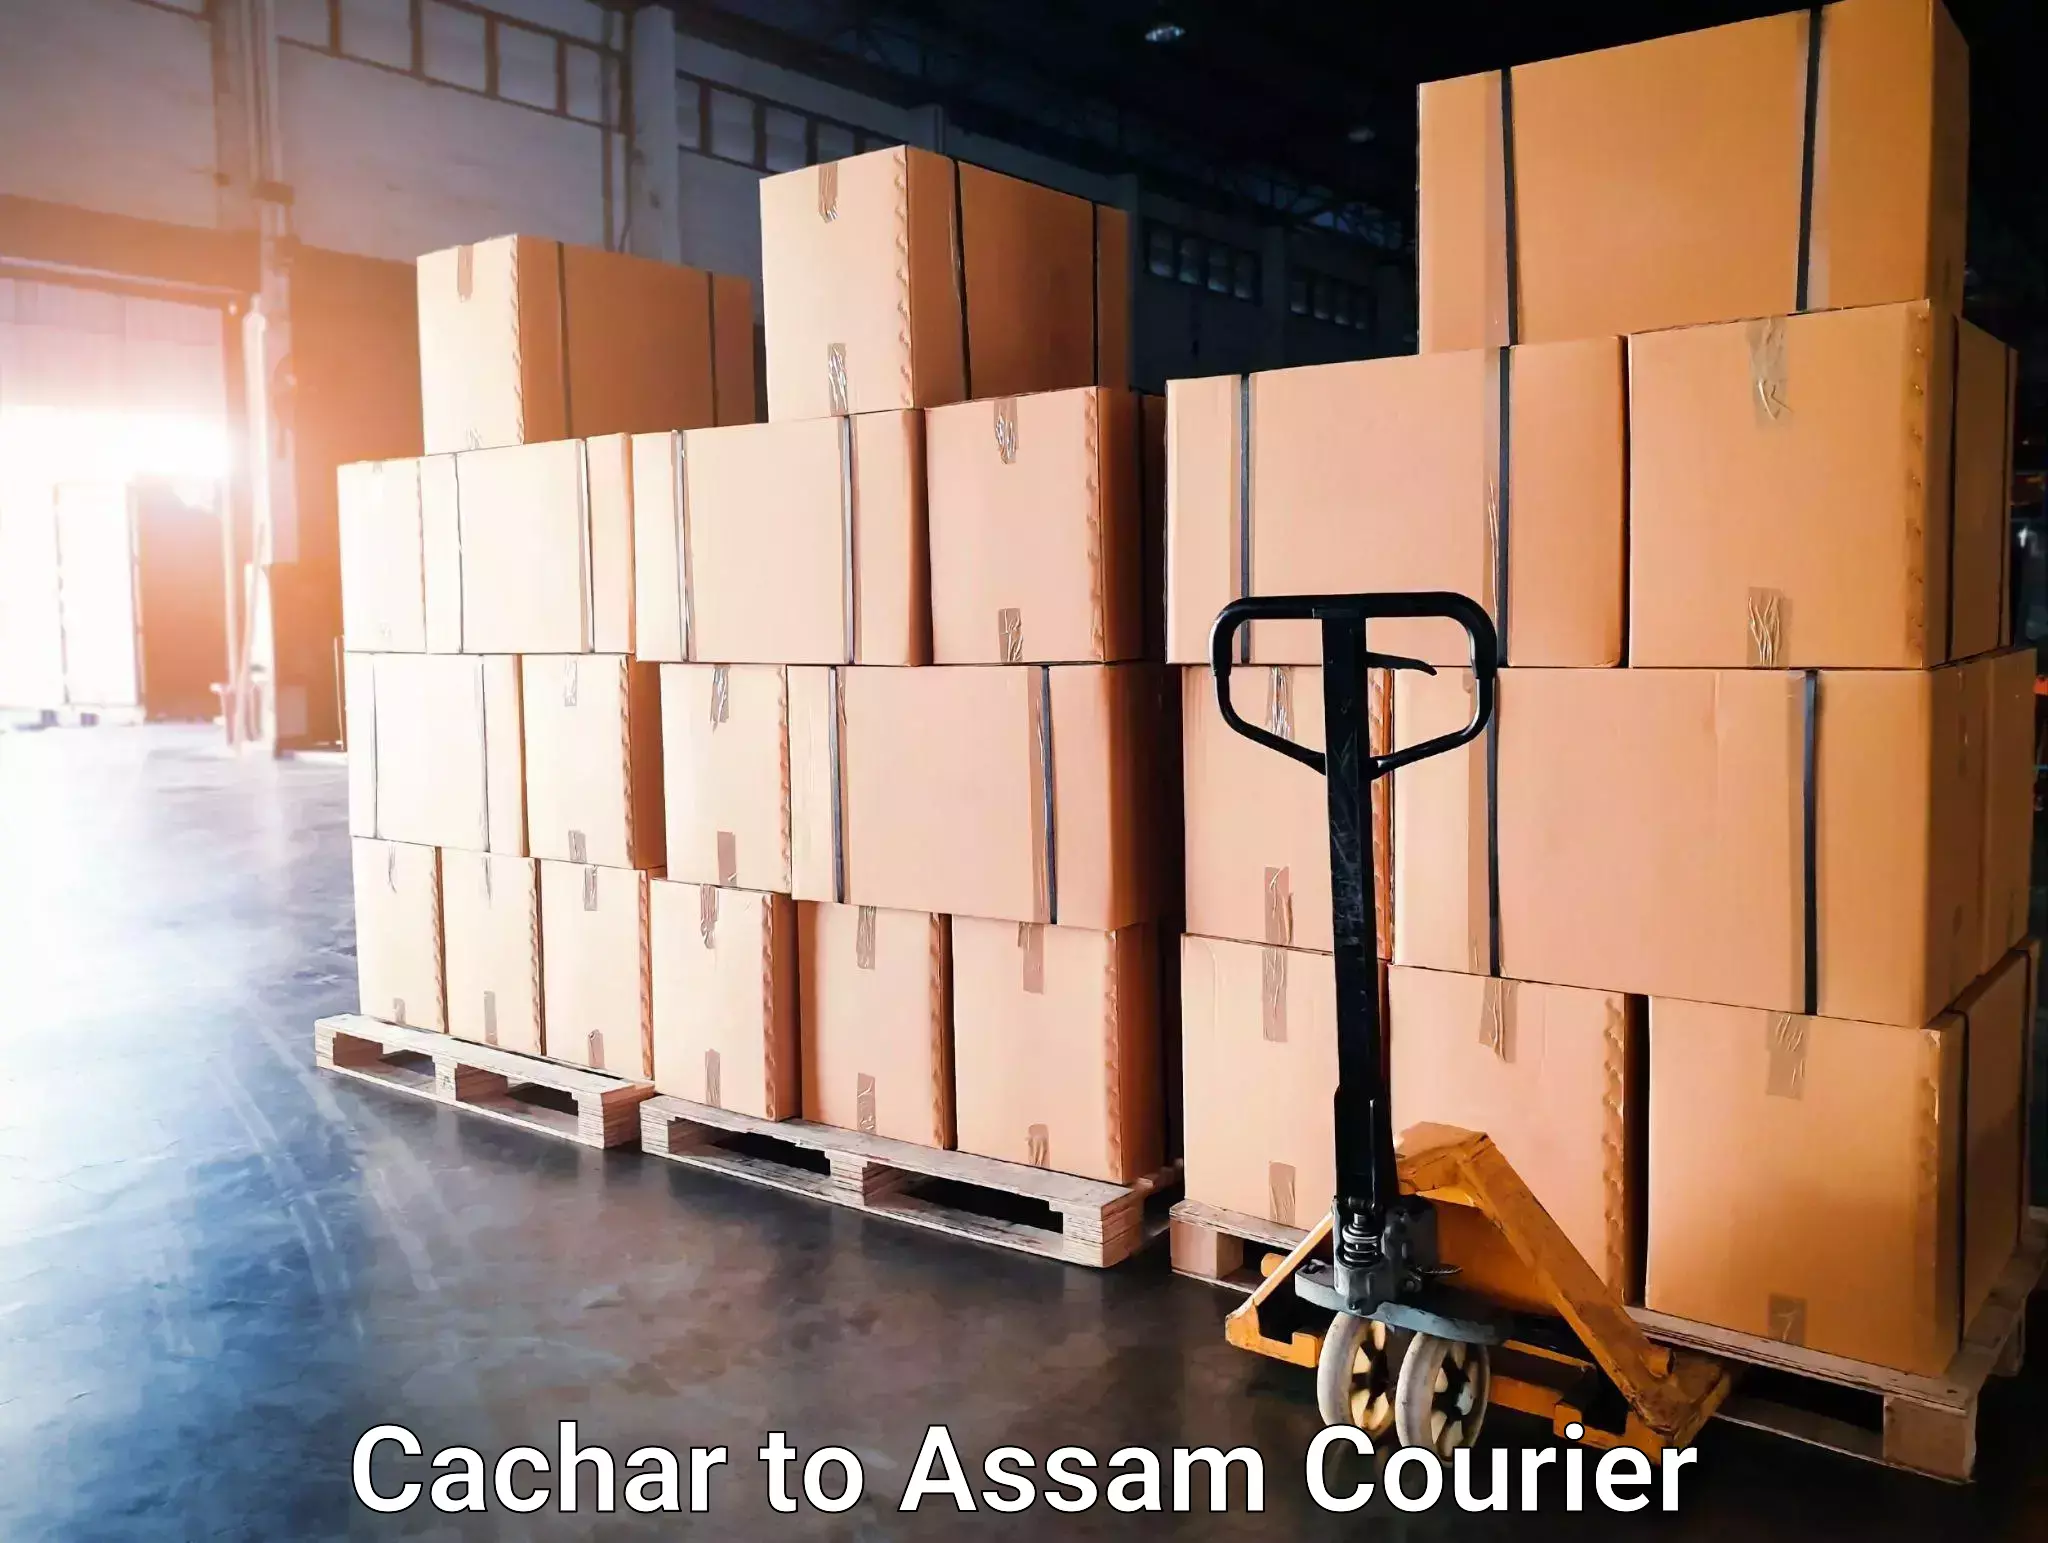 Emergency parcel delivery Cachar to Tezpur University